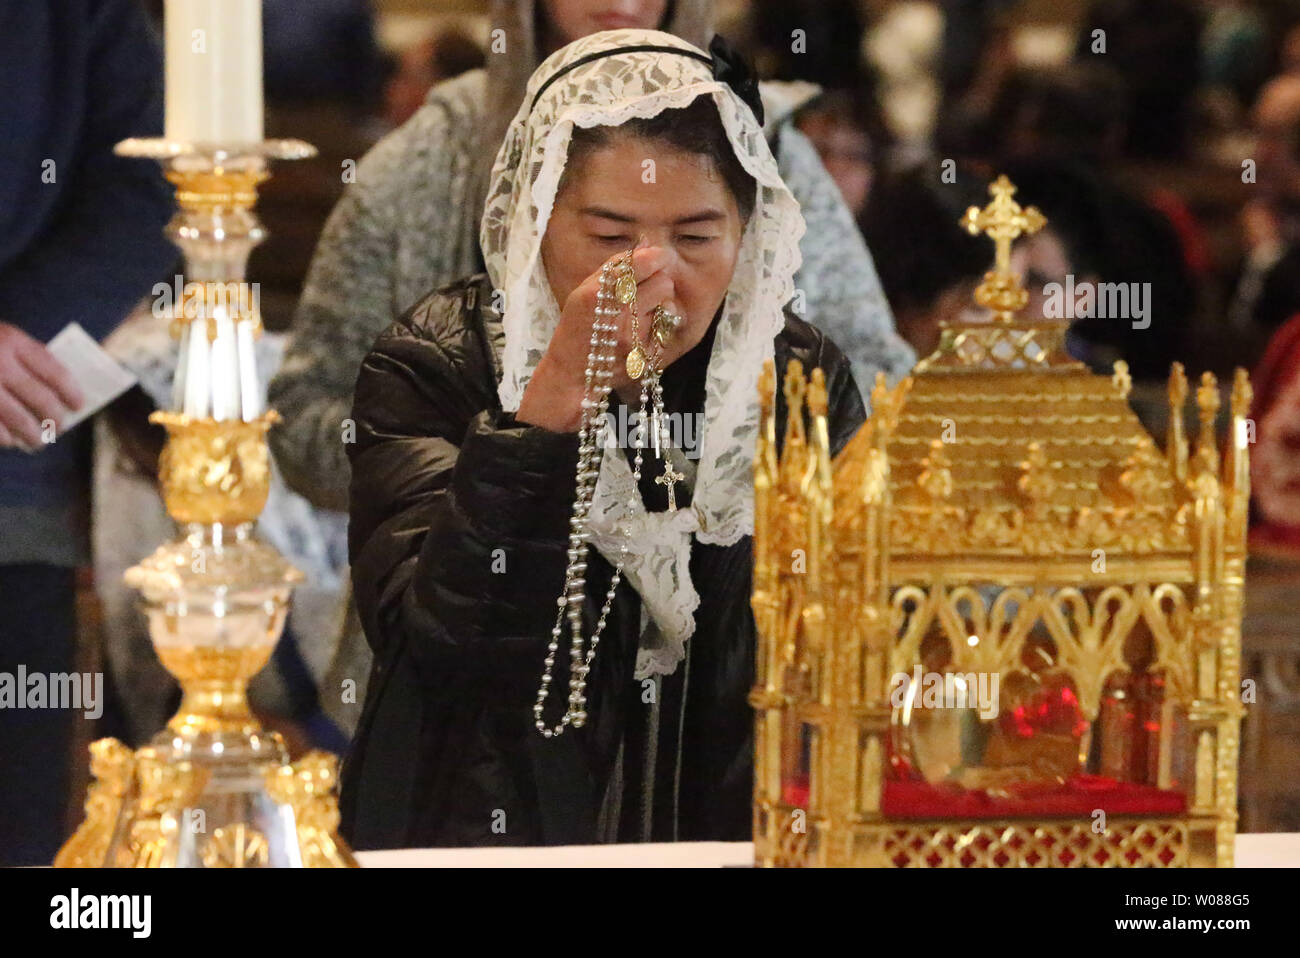 A parishioner holds holy beads in front of the Heart of a Priest display at the Cathedral Basilica of Saint Louis in St. Louis on March 15, 2019. St. John Vianney’s incorrupt heart is considered a major, first-class relic. The saint’s heart has resisted decay for more than 150 years. A relic like the incorrupt heart offers a tangible reminder of communion with the holy men and women who have gone before, offering strength to follow their example of faithful living. St. John Vianney, popularly known as the Cure? of Ars, is considered a model of priestly generosity, purity and prayerfulness. Bor Stock Photo